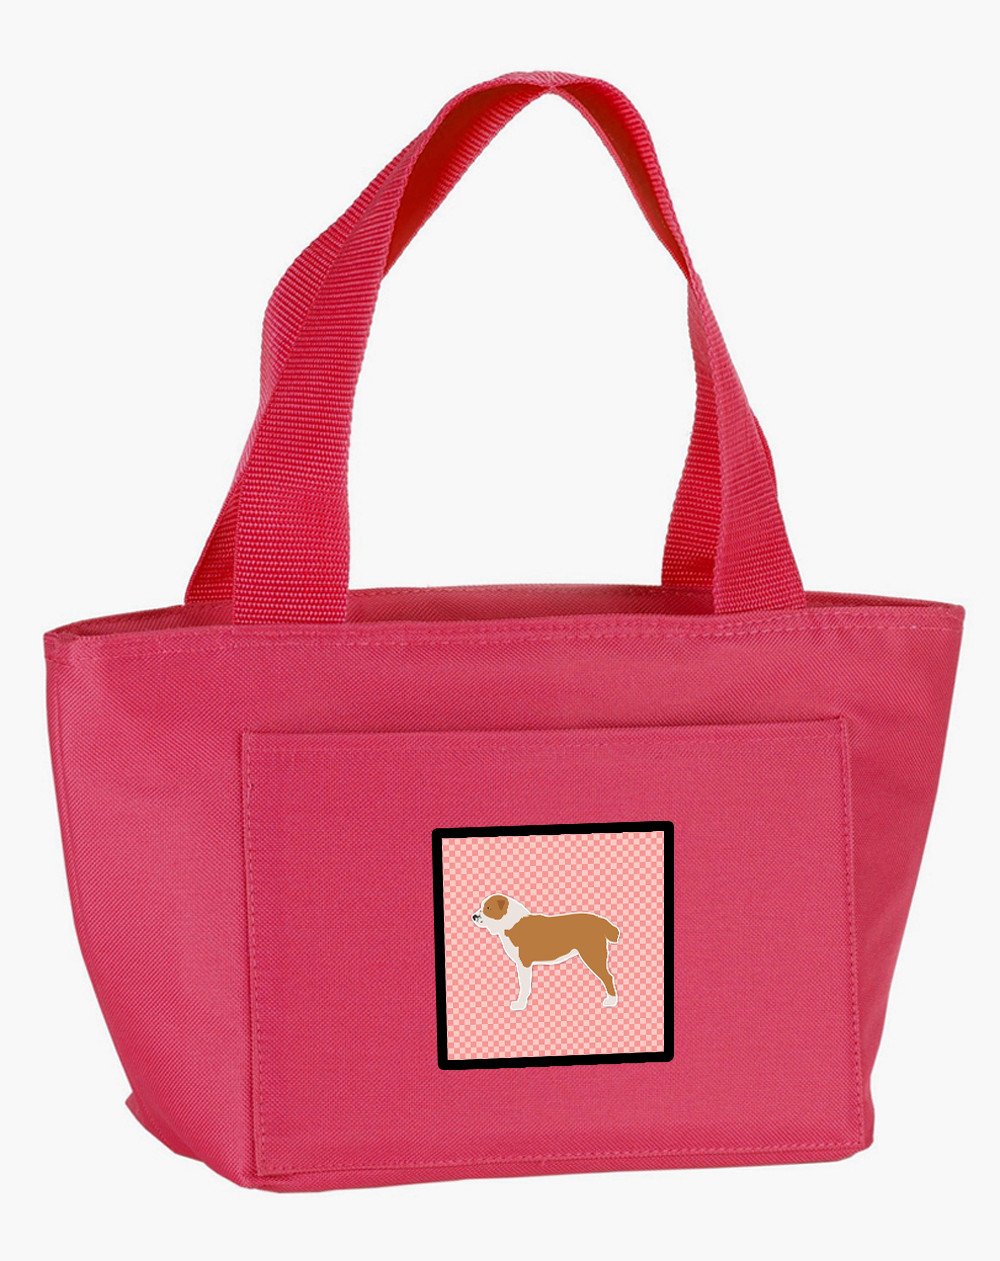 Central Asian Shepherd Dog Checkerboard Pink Lunch Bag BB3628PK-8808 by Caroline's Treasures